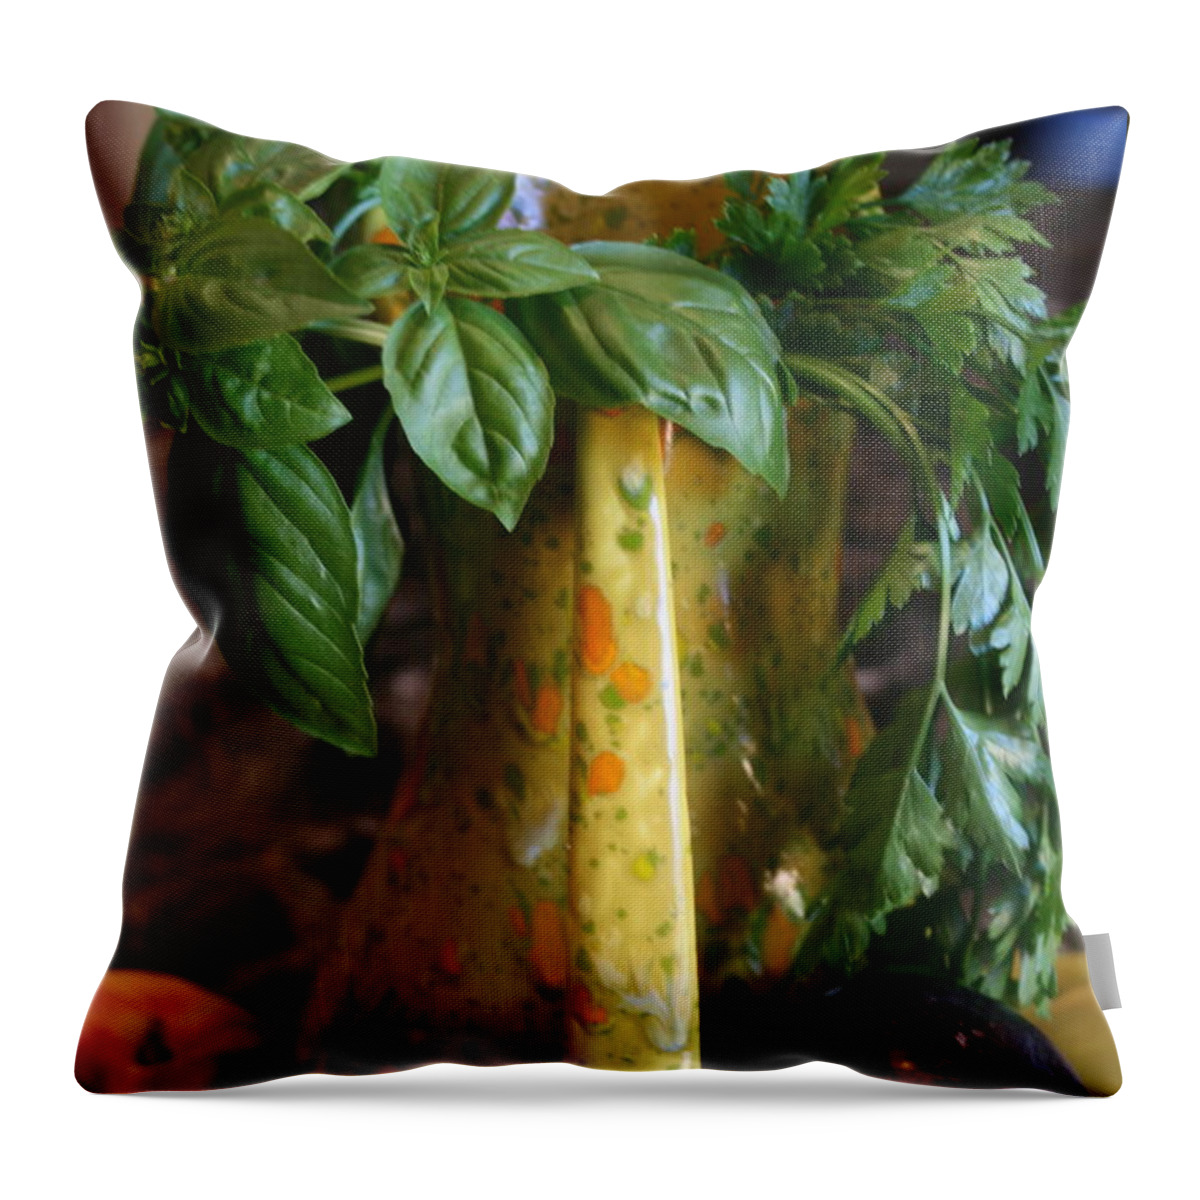 Still-life Throw Pillow featuring the photograph Summer's Bounty by Kay Novy